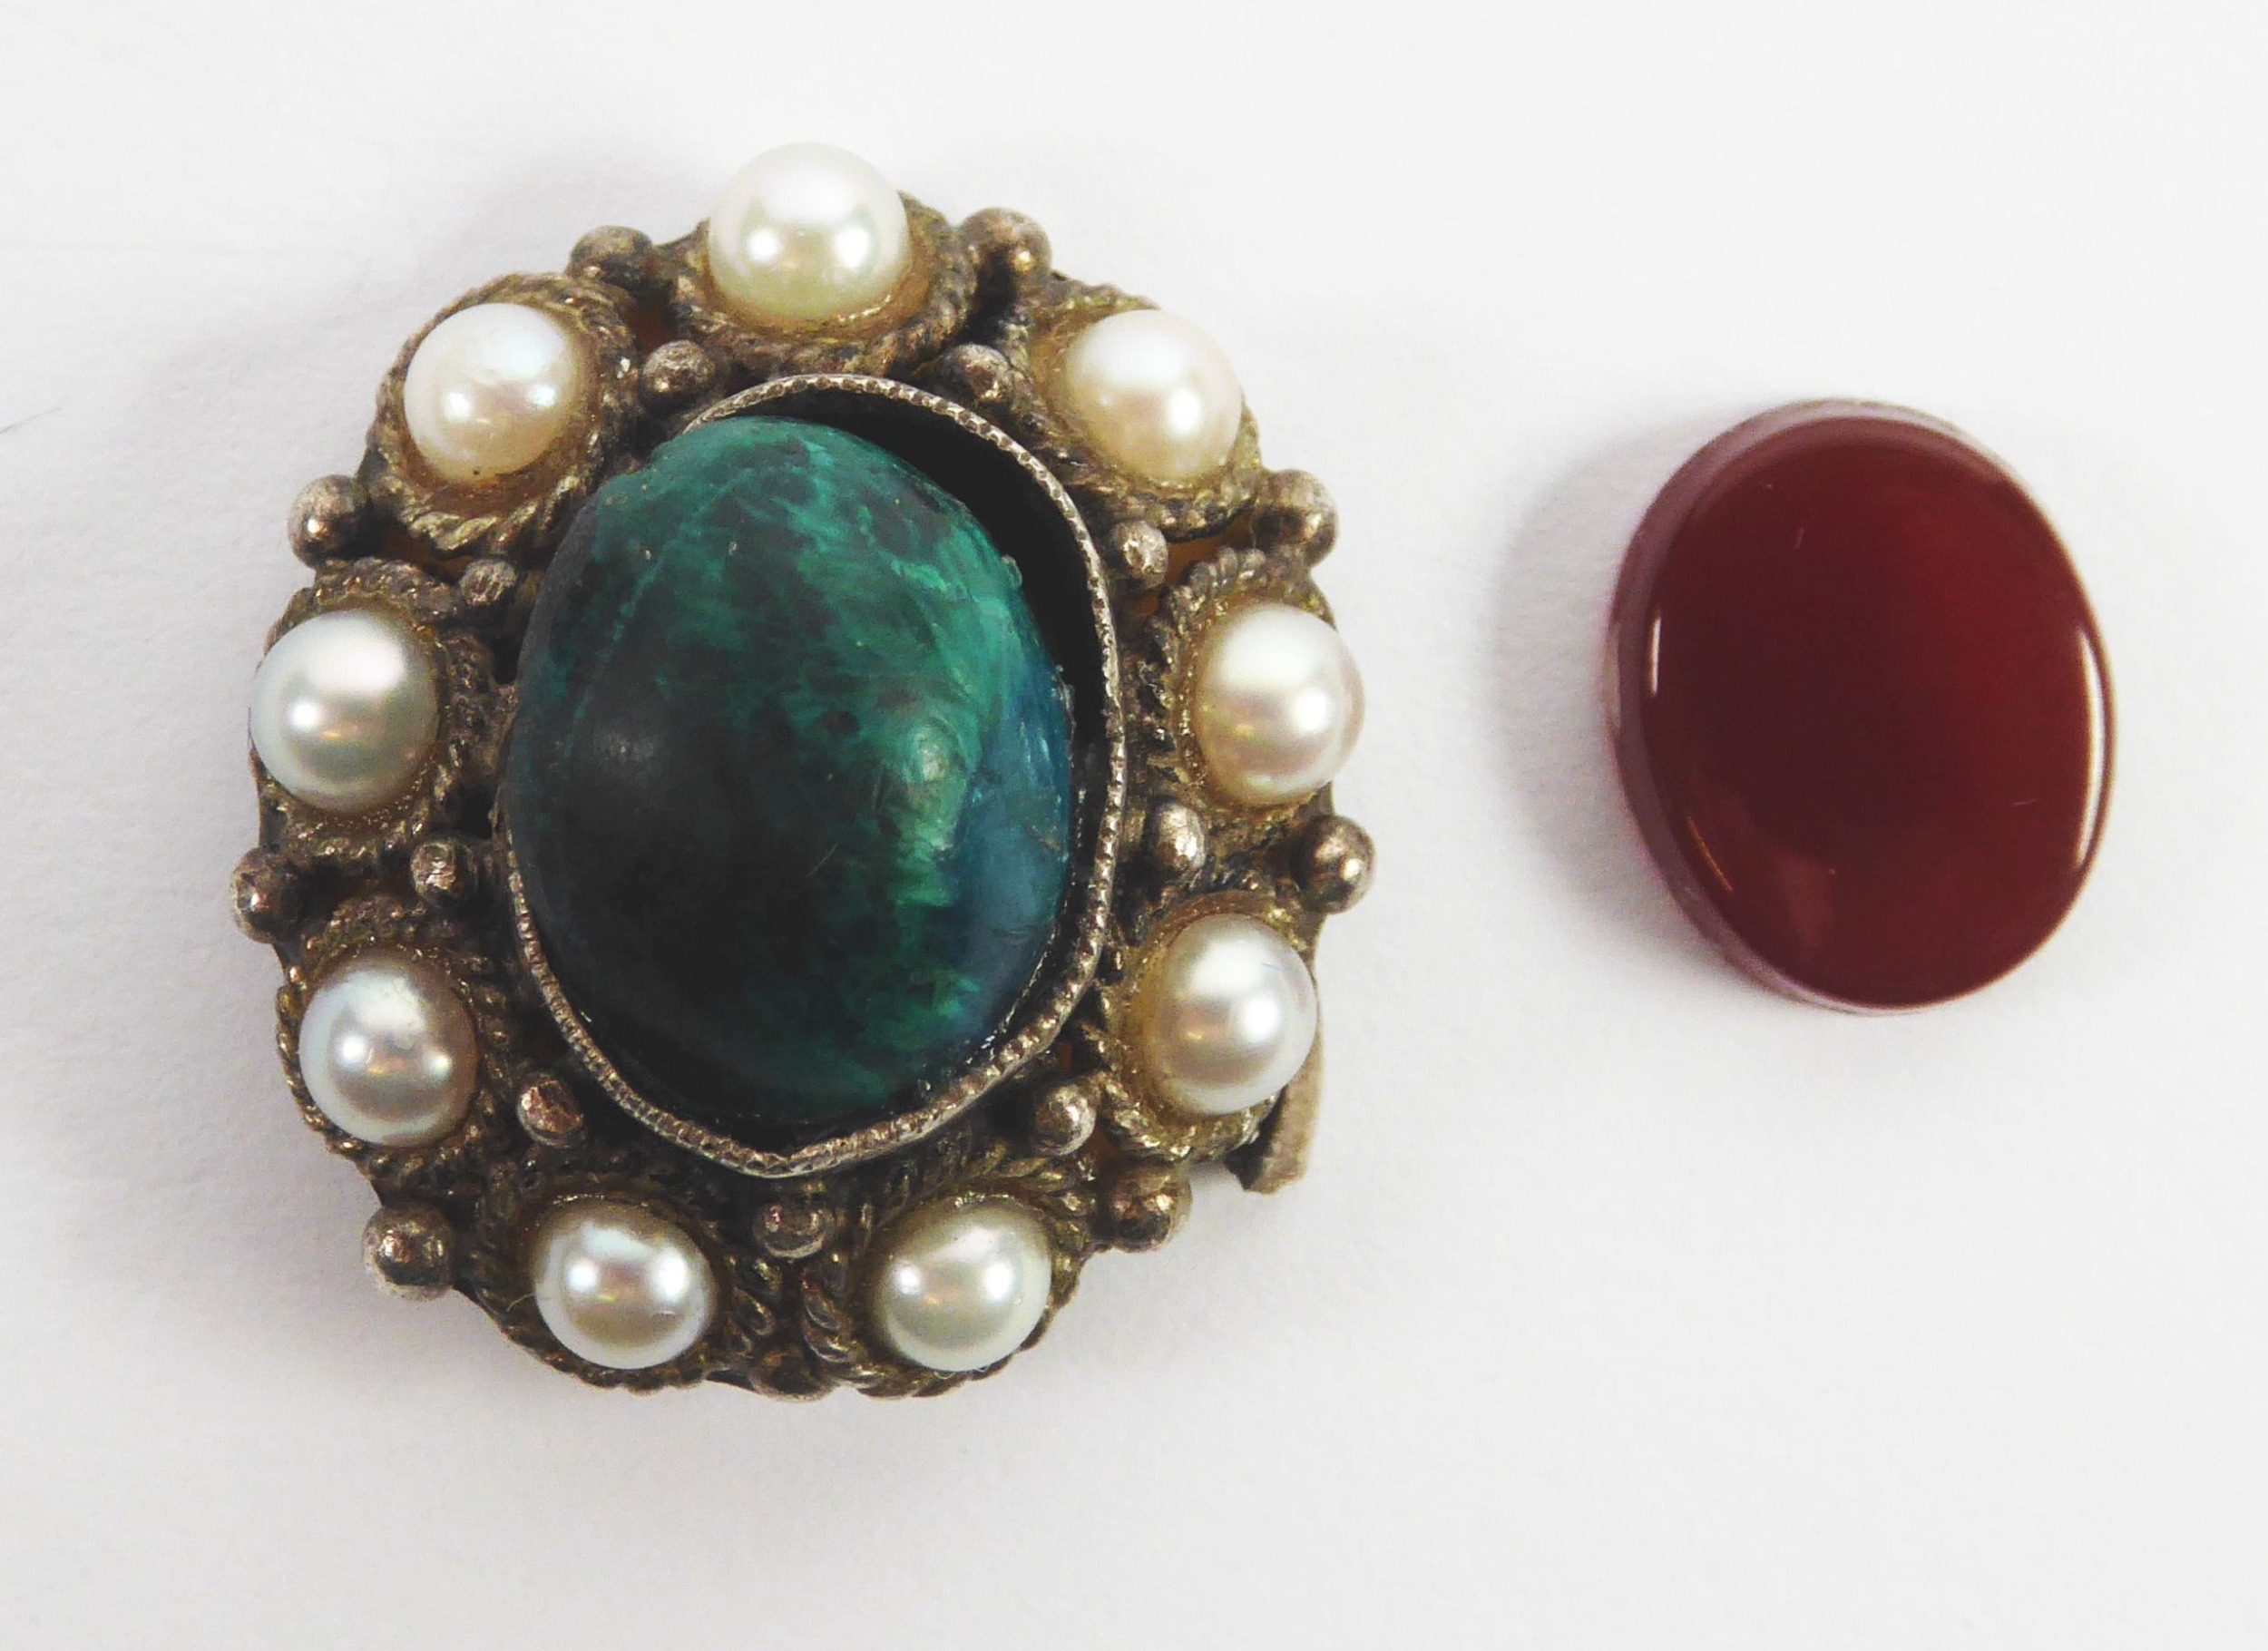 VICTORIAN PENDANT, set with a cabochon oval malachite and surround of nine small pearls, 3/4in (2cm)